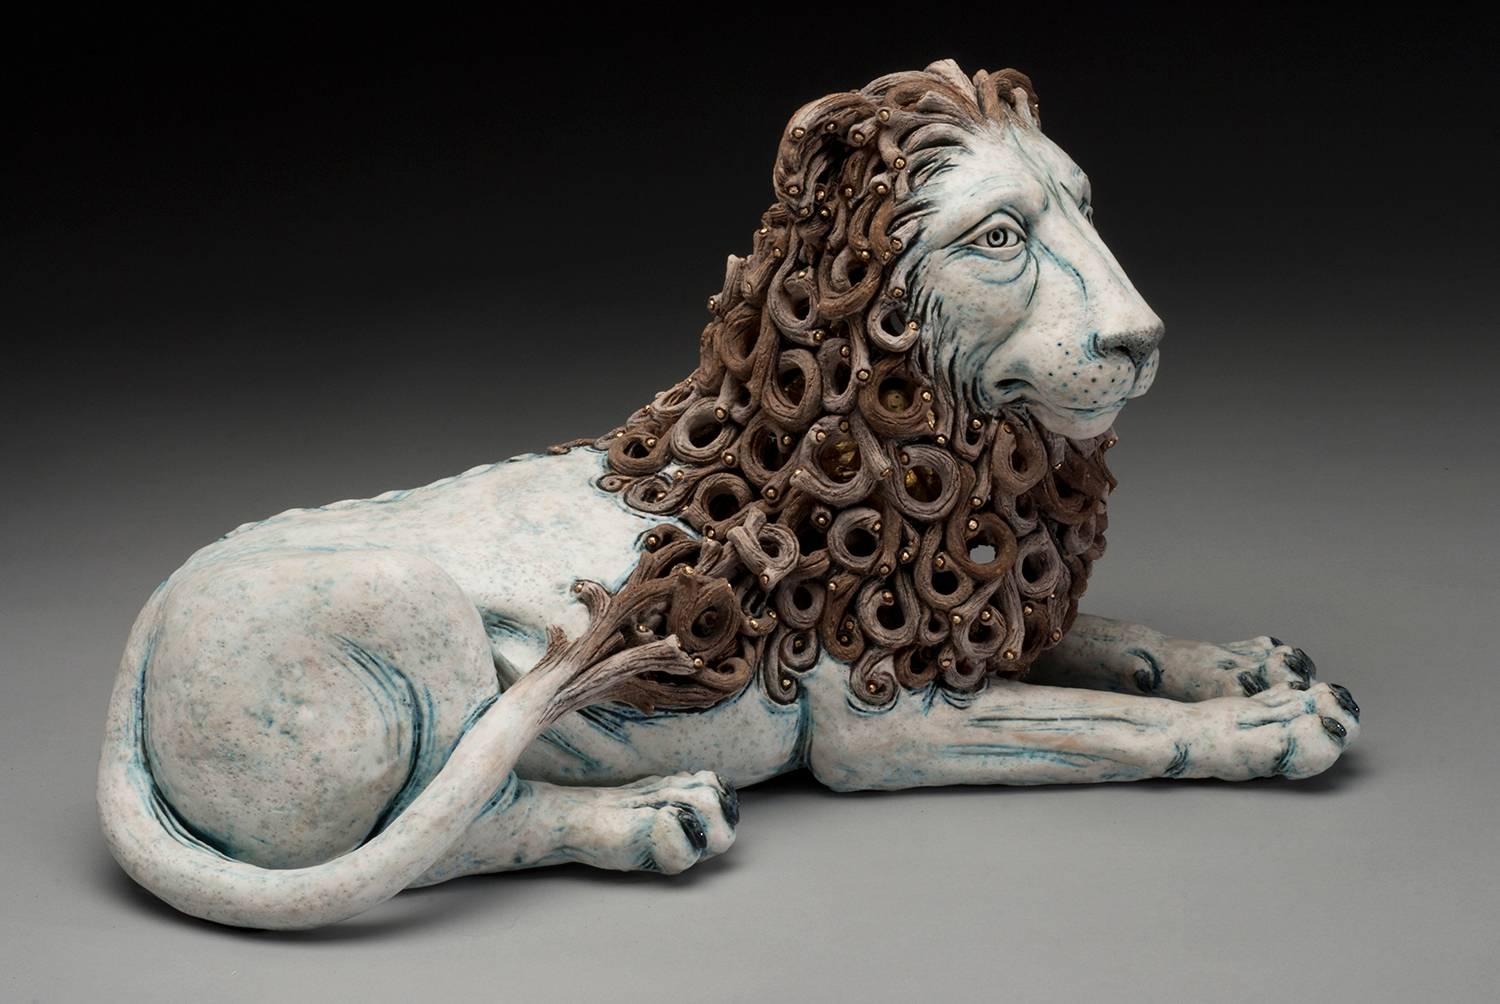 Adrian Arleo Abstract Sculpture - Reclined Lion With Internal Woman